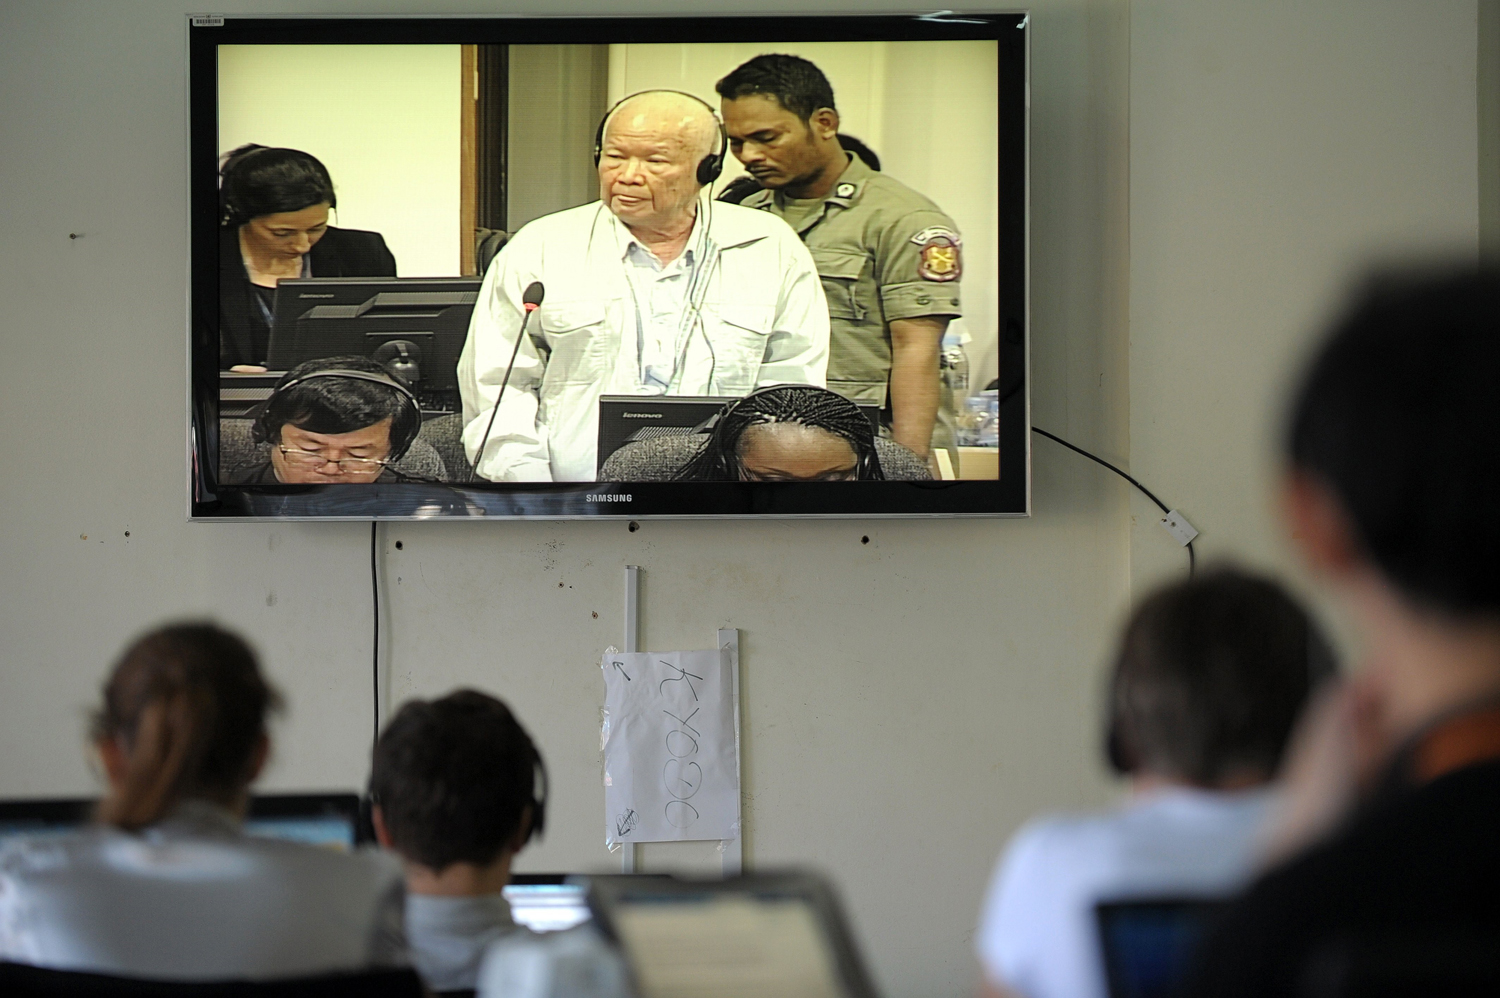 Cambodian and international journalists watch a live video feed showing former Khmer Rouge head of state Khieu Samphan during a hearing for his trial at the Extraordinary Chamber in the Courts of Cambodia in Phnom Penh on Jan. 8, 2015 (Tang Chhin Sothy—AFP/Getty Images)